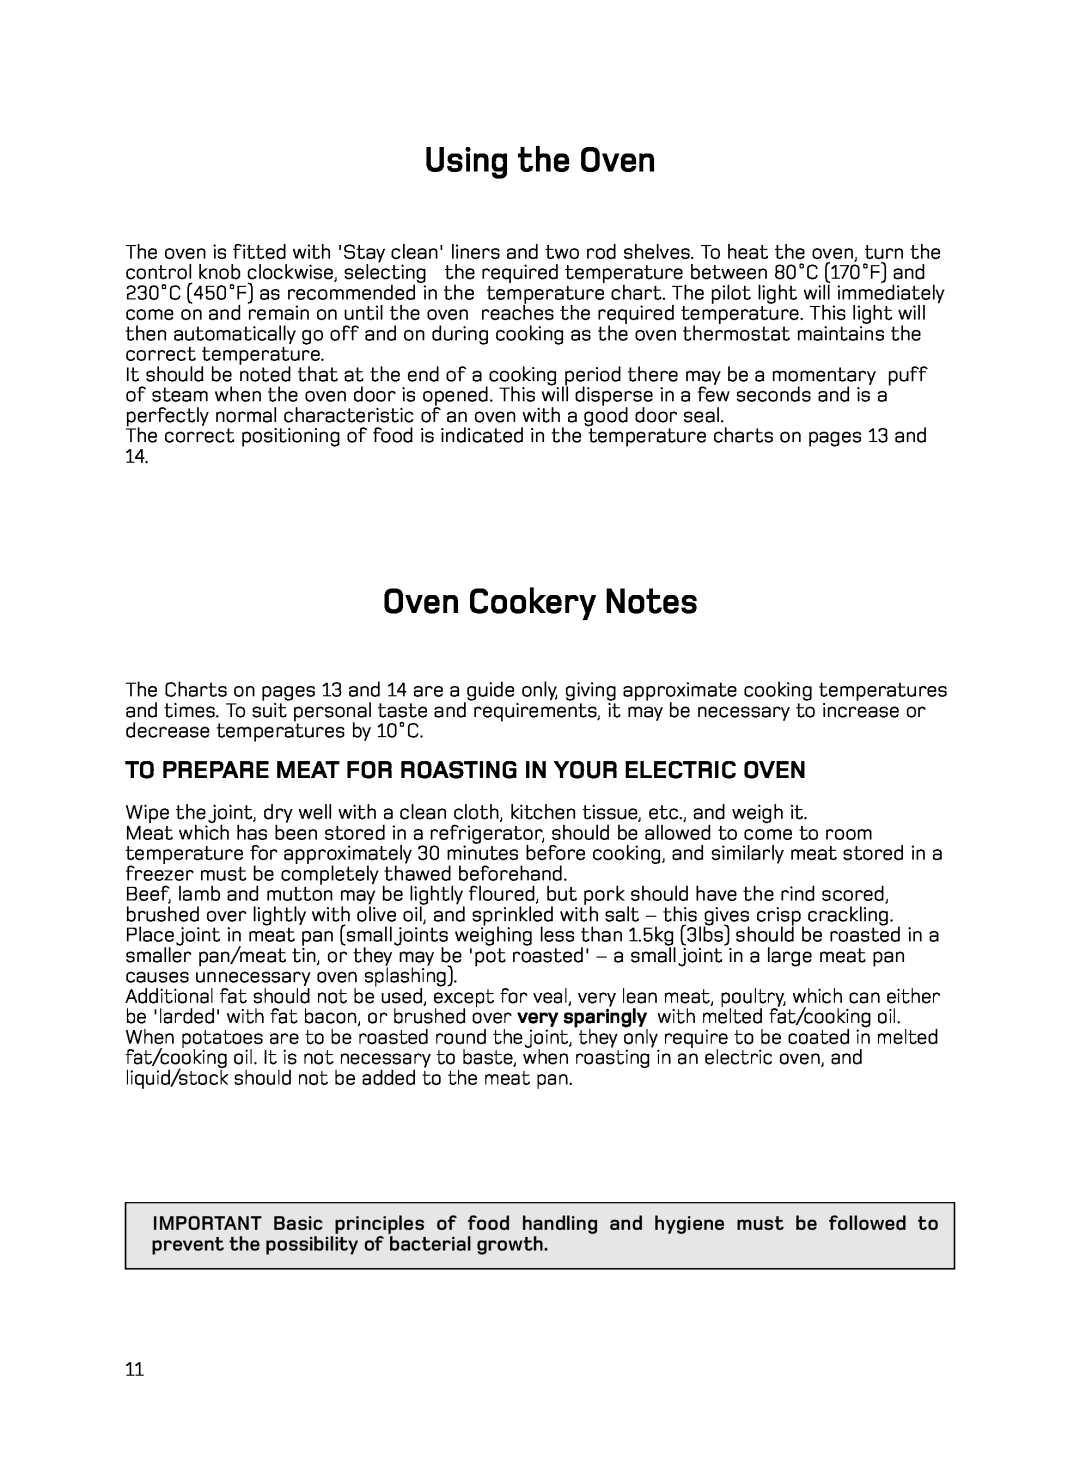 Hotpoint H050E manual Using the Oven, Oven Cookery Notes 